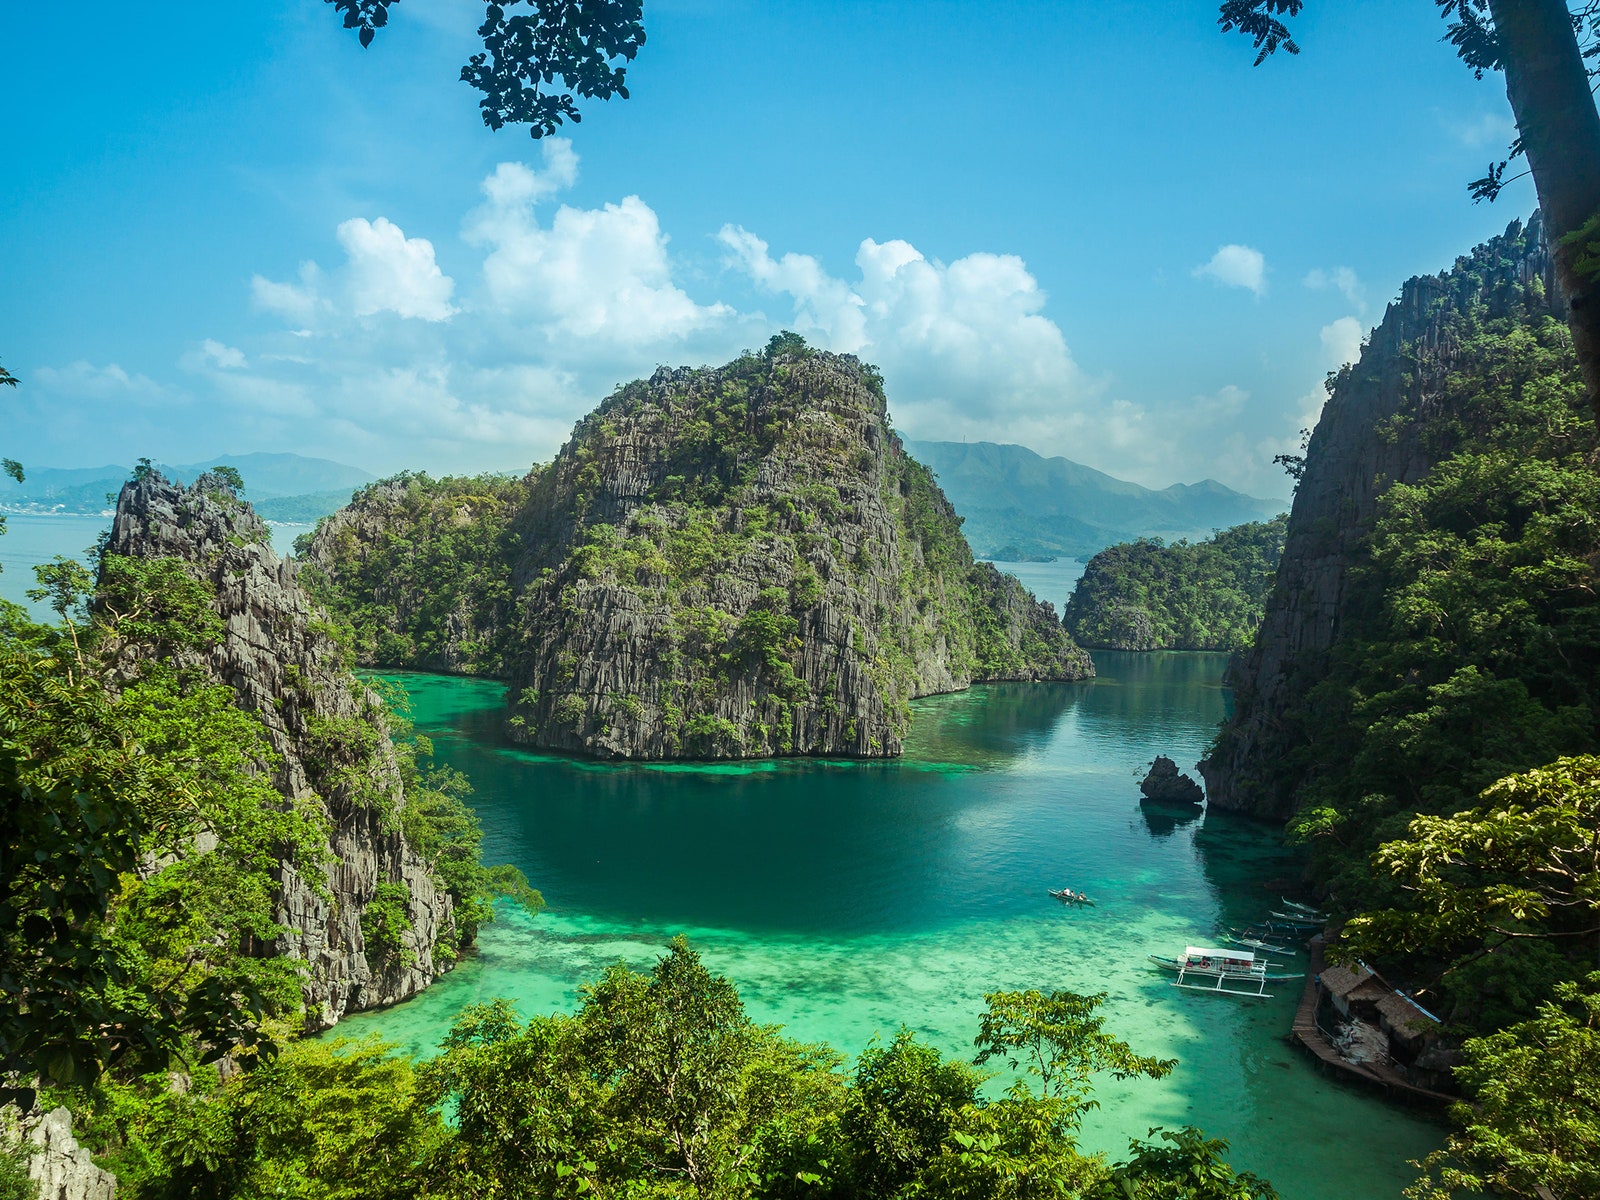 22 Countries. I'll Be Impressed If You Know 11 Capitals Quiz Palawan, Philippines